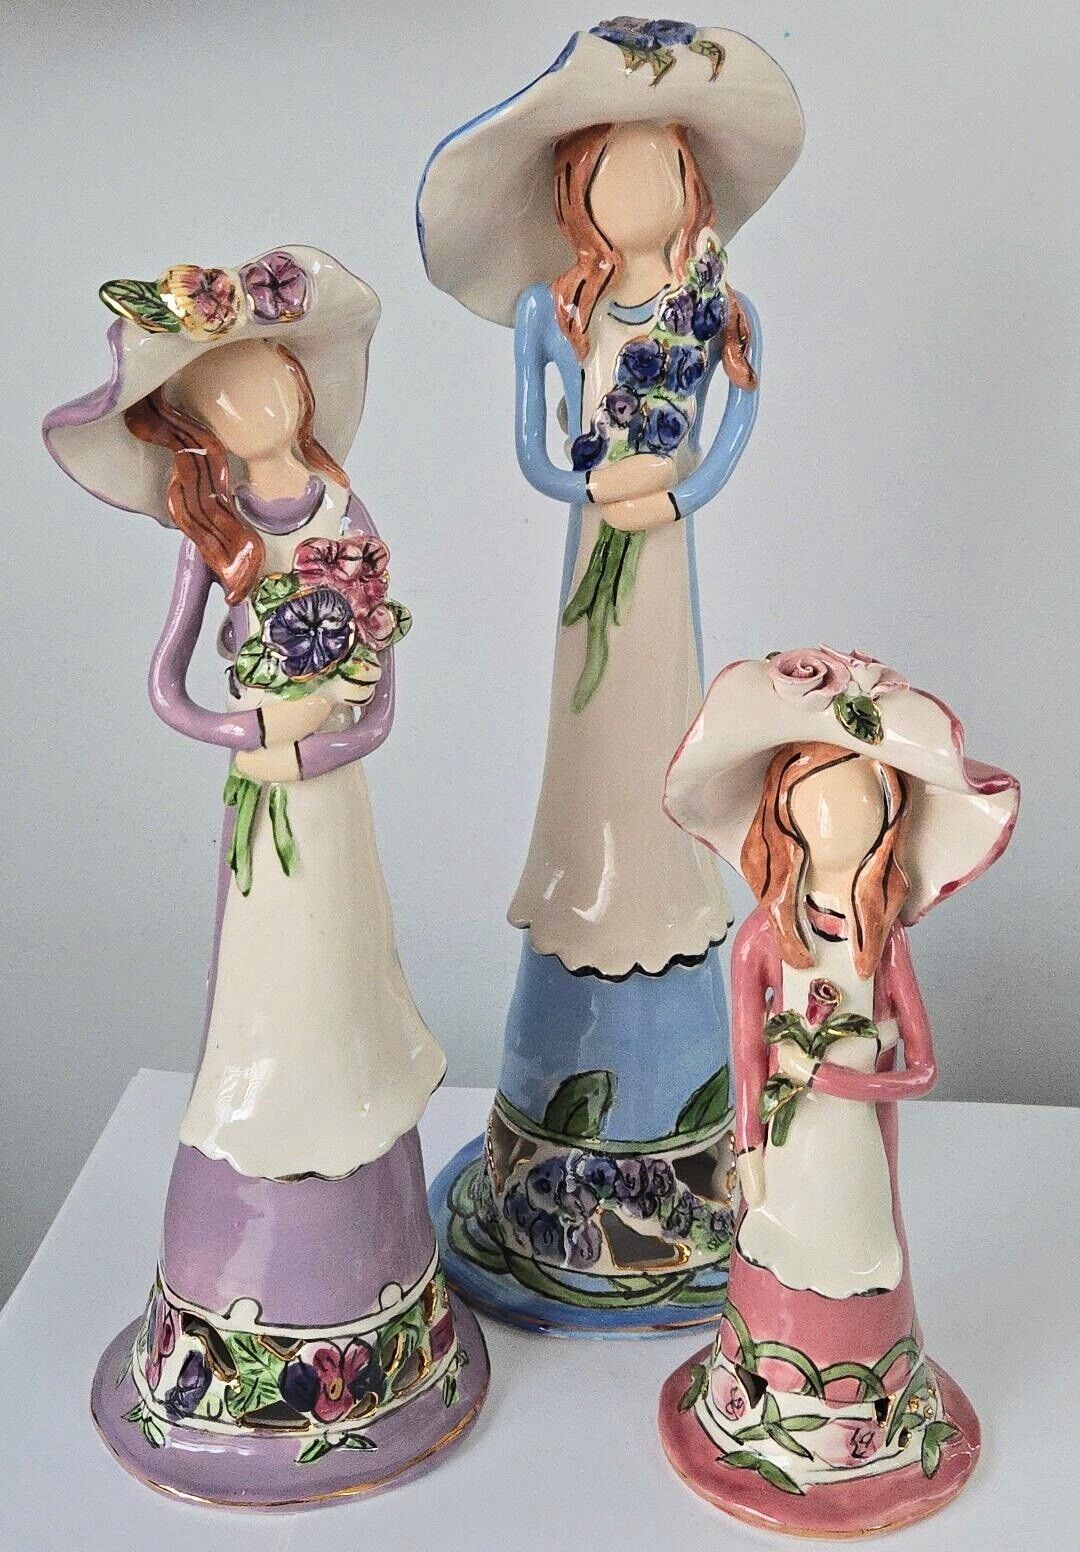 Lot of 3 Heather Goldmine Lady w/Flowers Figurines 2002 Blue Sky--Mint Condition